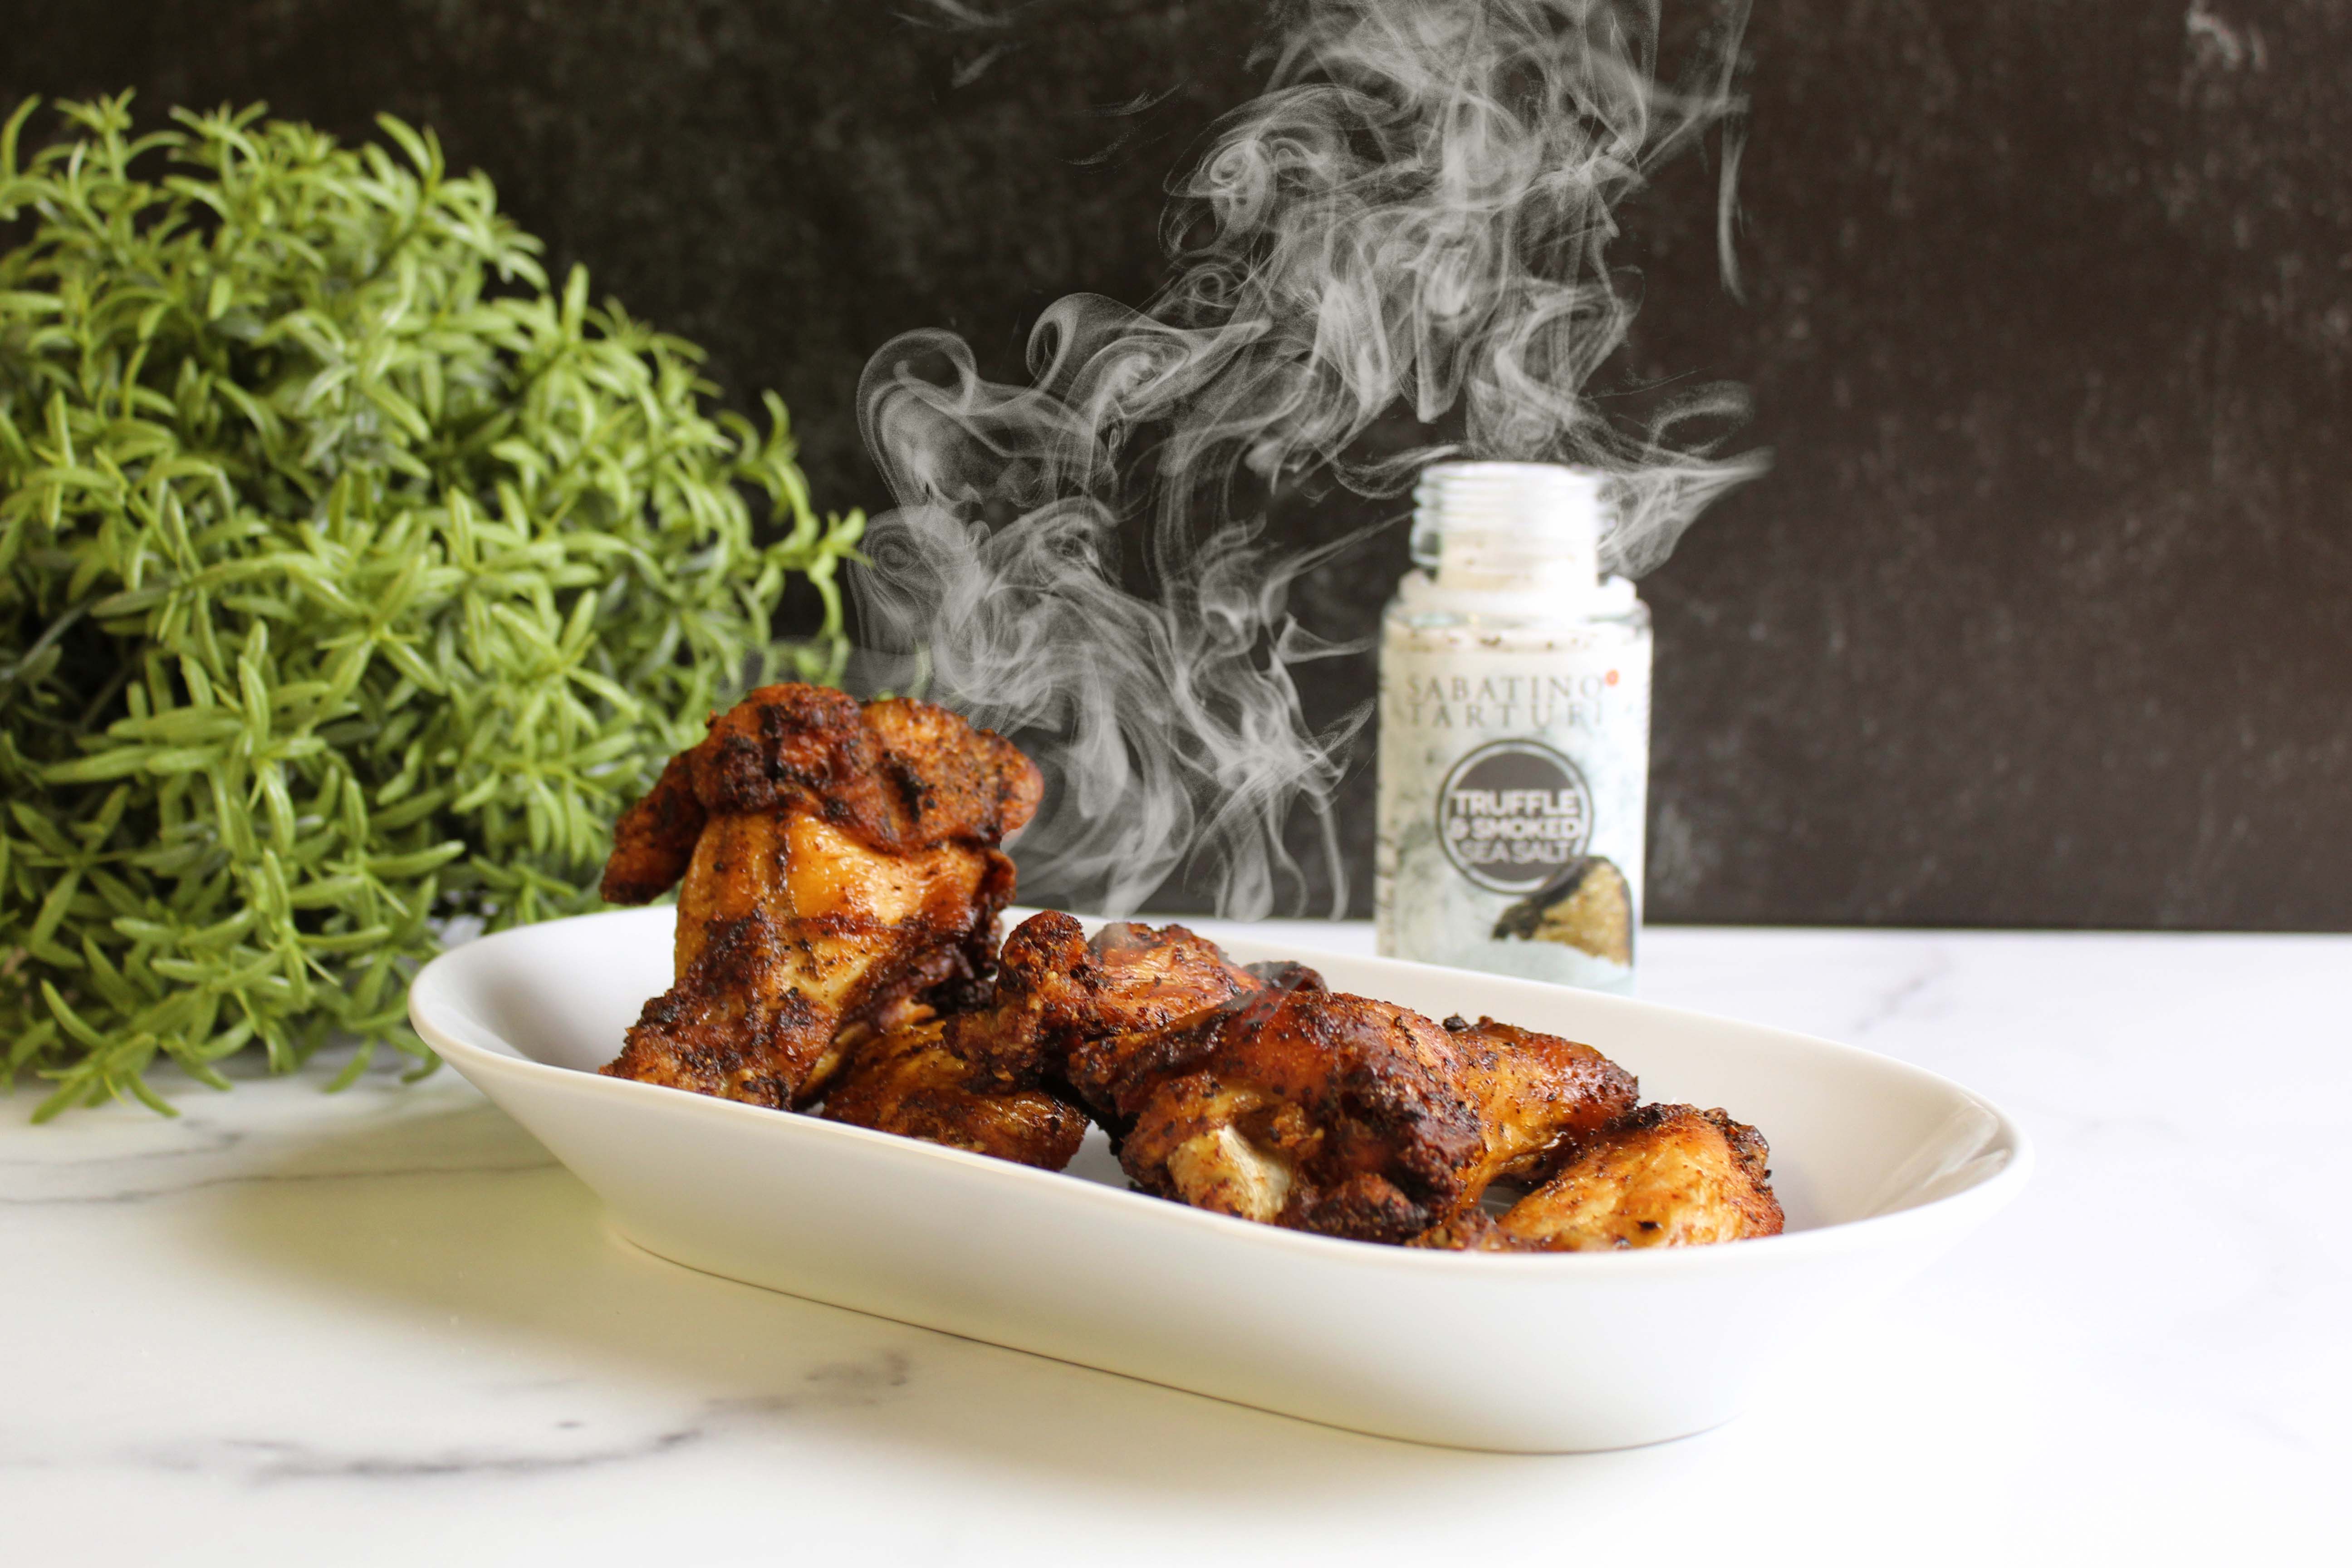 The new Truffle & Smoked Sea Salt is perfect with smoked wings, grilled meats, and other barbecue favorites.